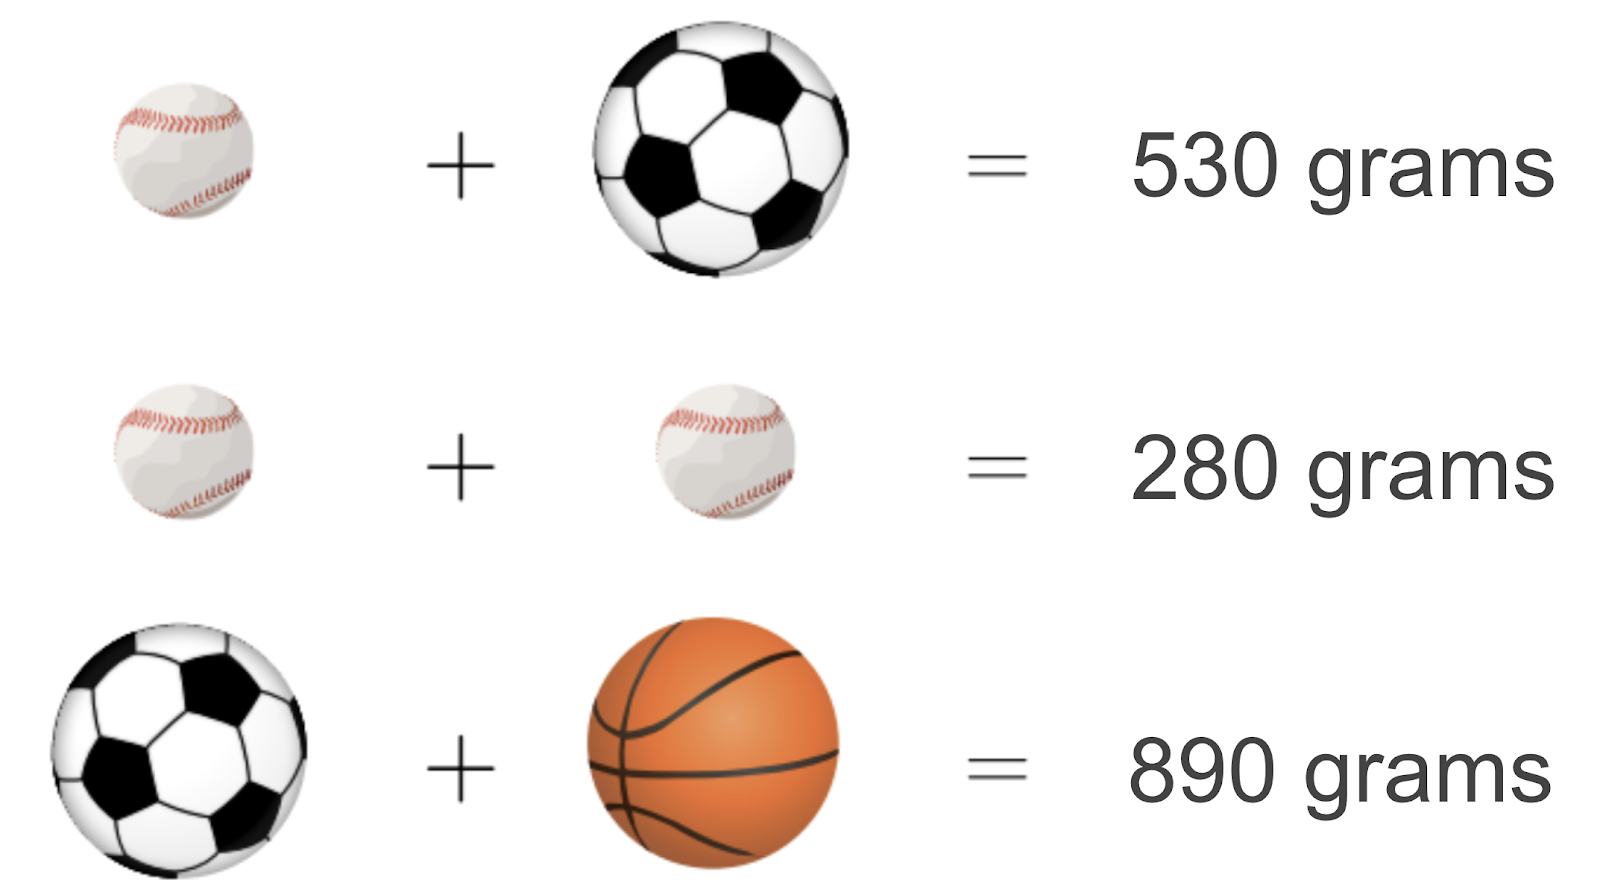 Three equations combining the mass of sports equipment. First is baseball plus soccer ball equals 530 grams, second is baseball plus baseball equals 280 grams, and third is soccer ball plus basketball equals 890 grams.